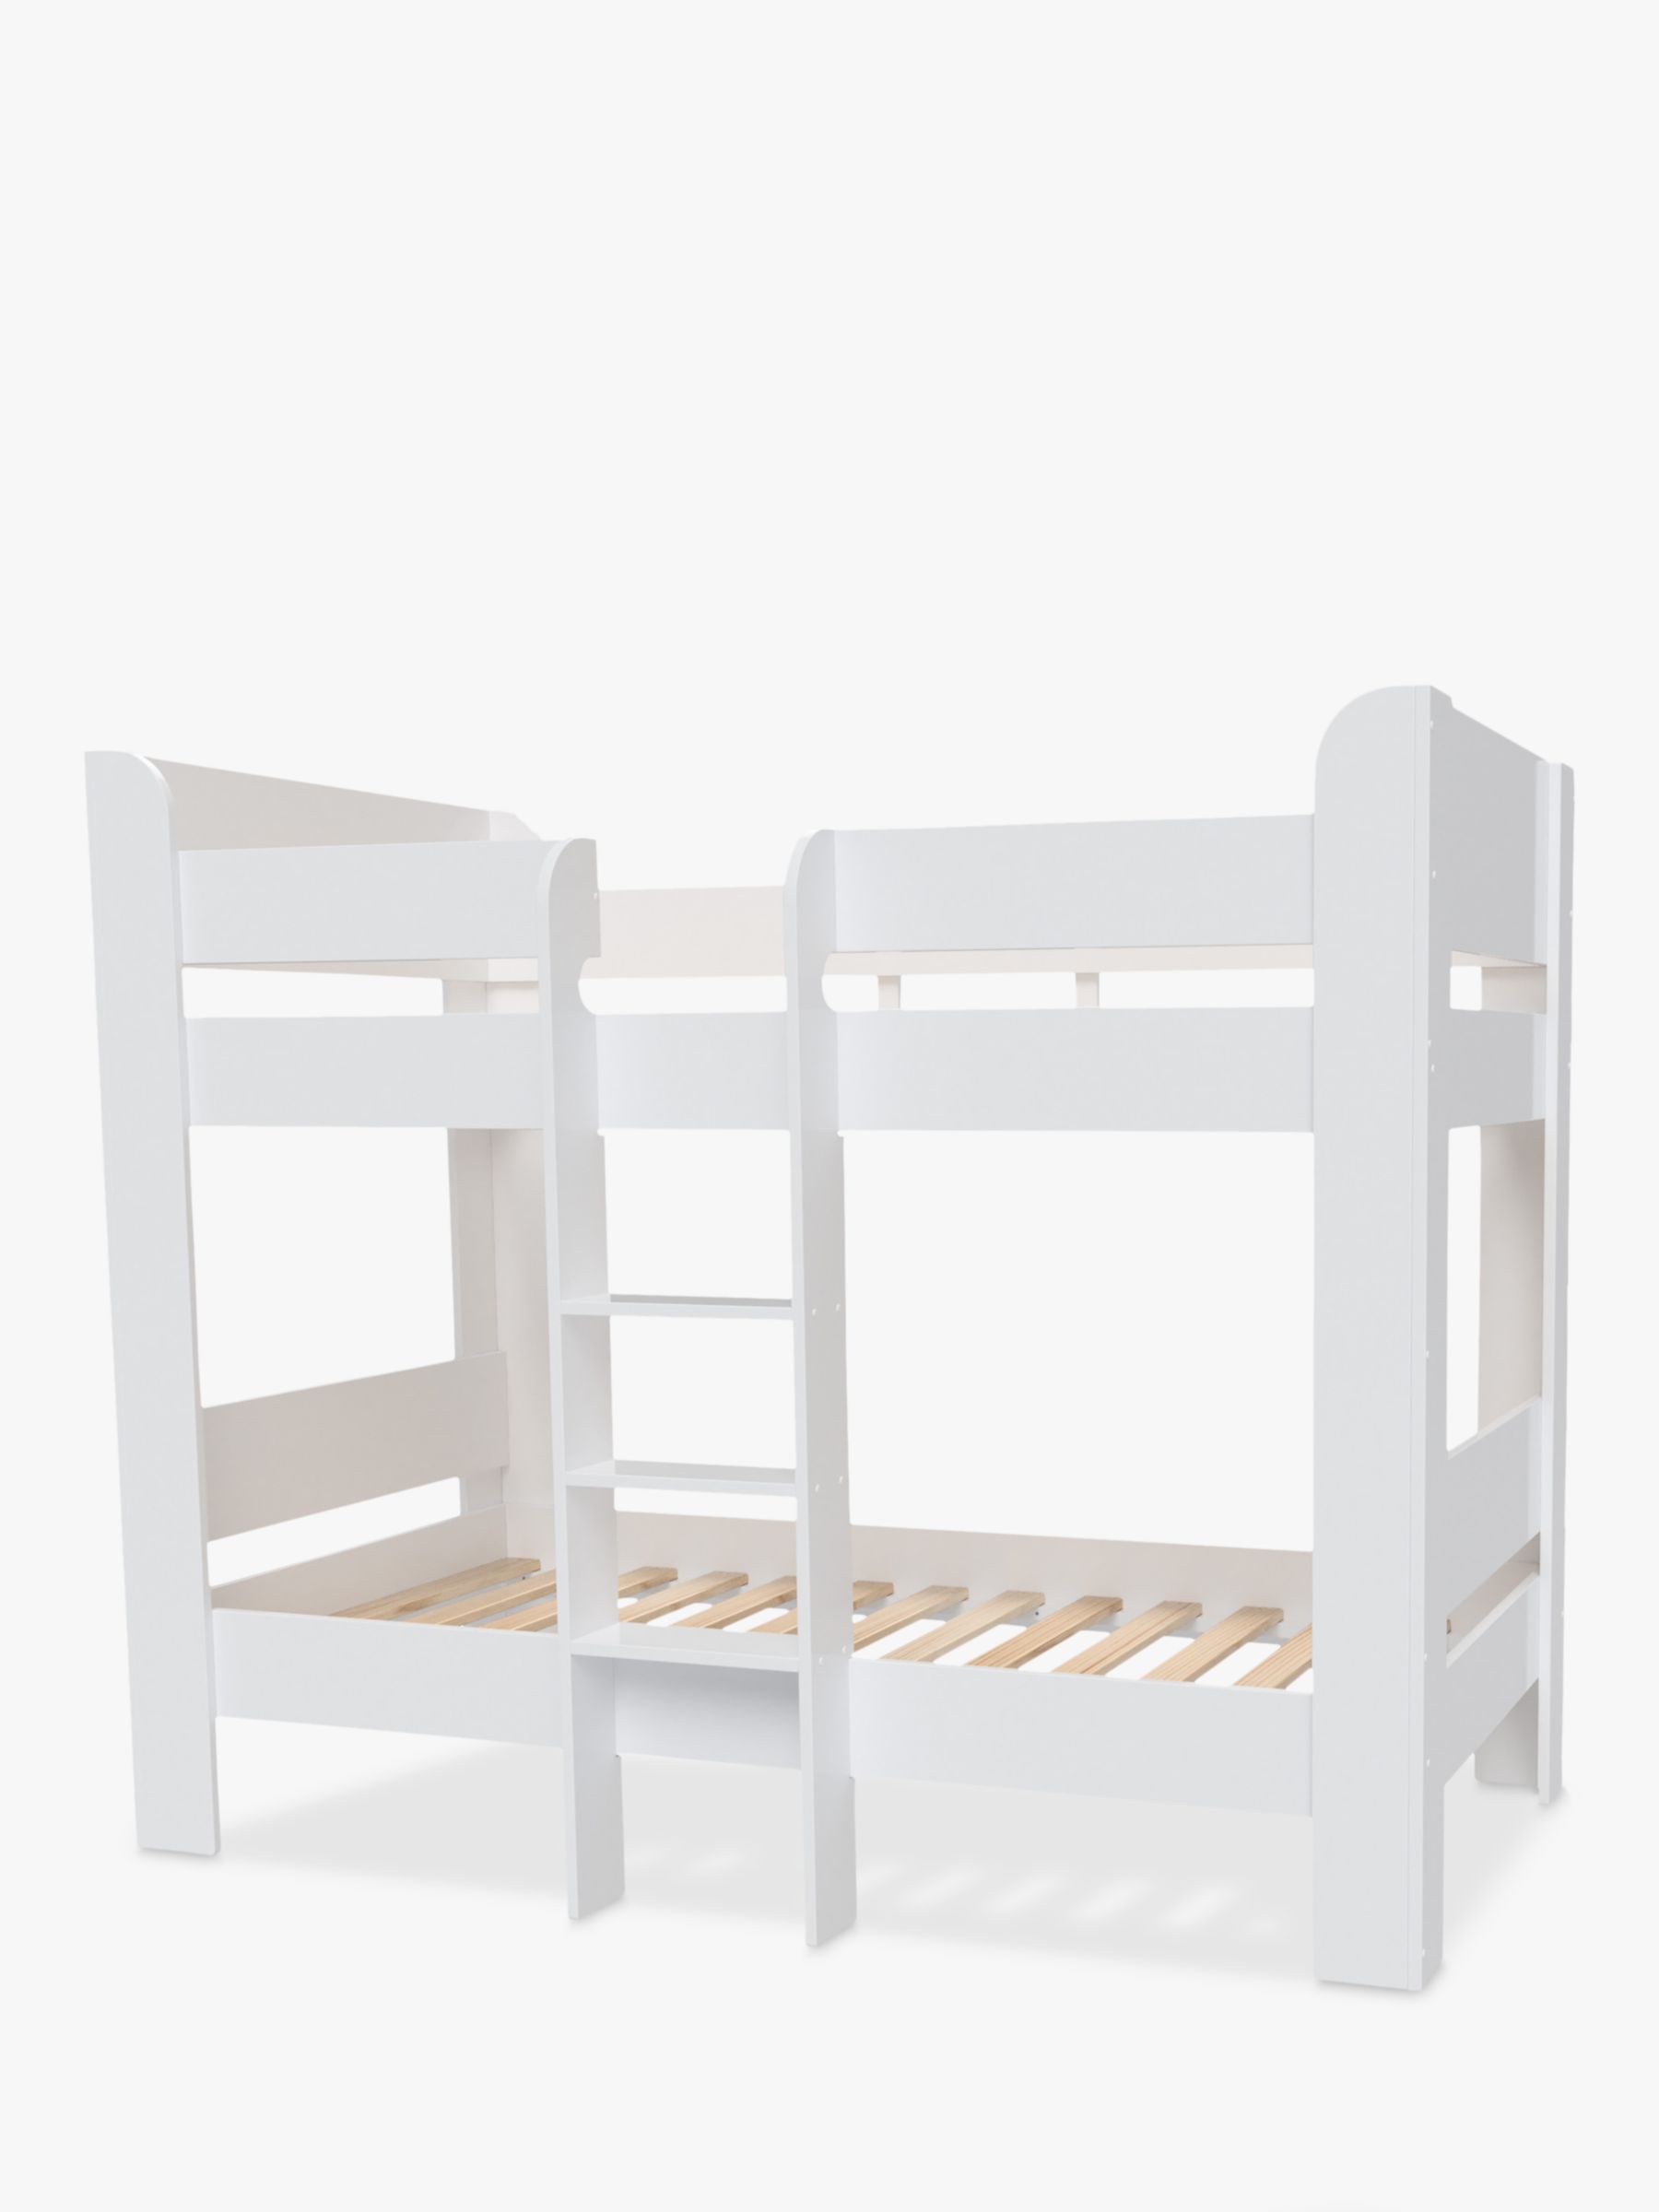 Paddington Bunk Bed Single White, Bunk Beds That Can Be Single Beds